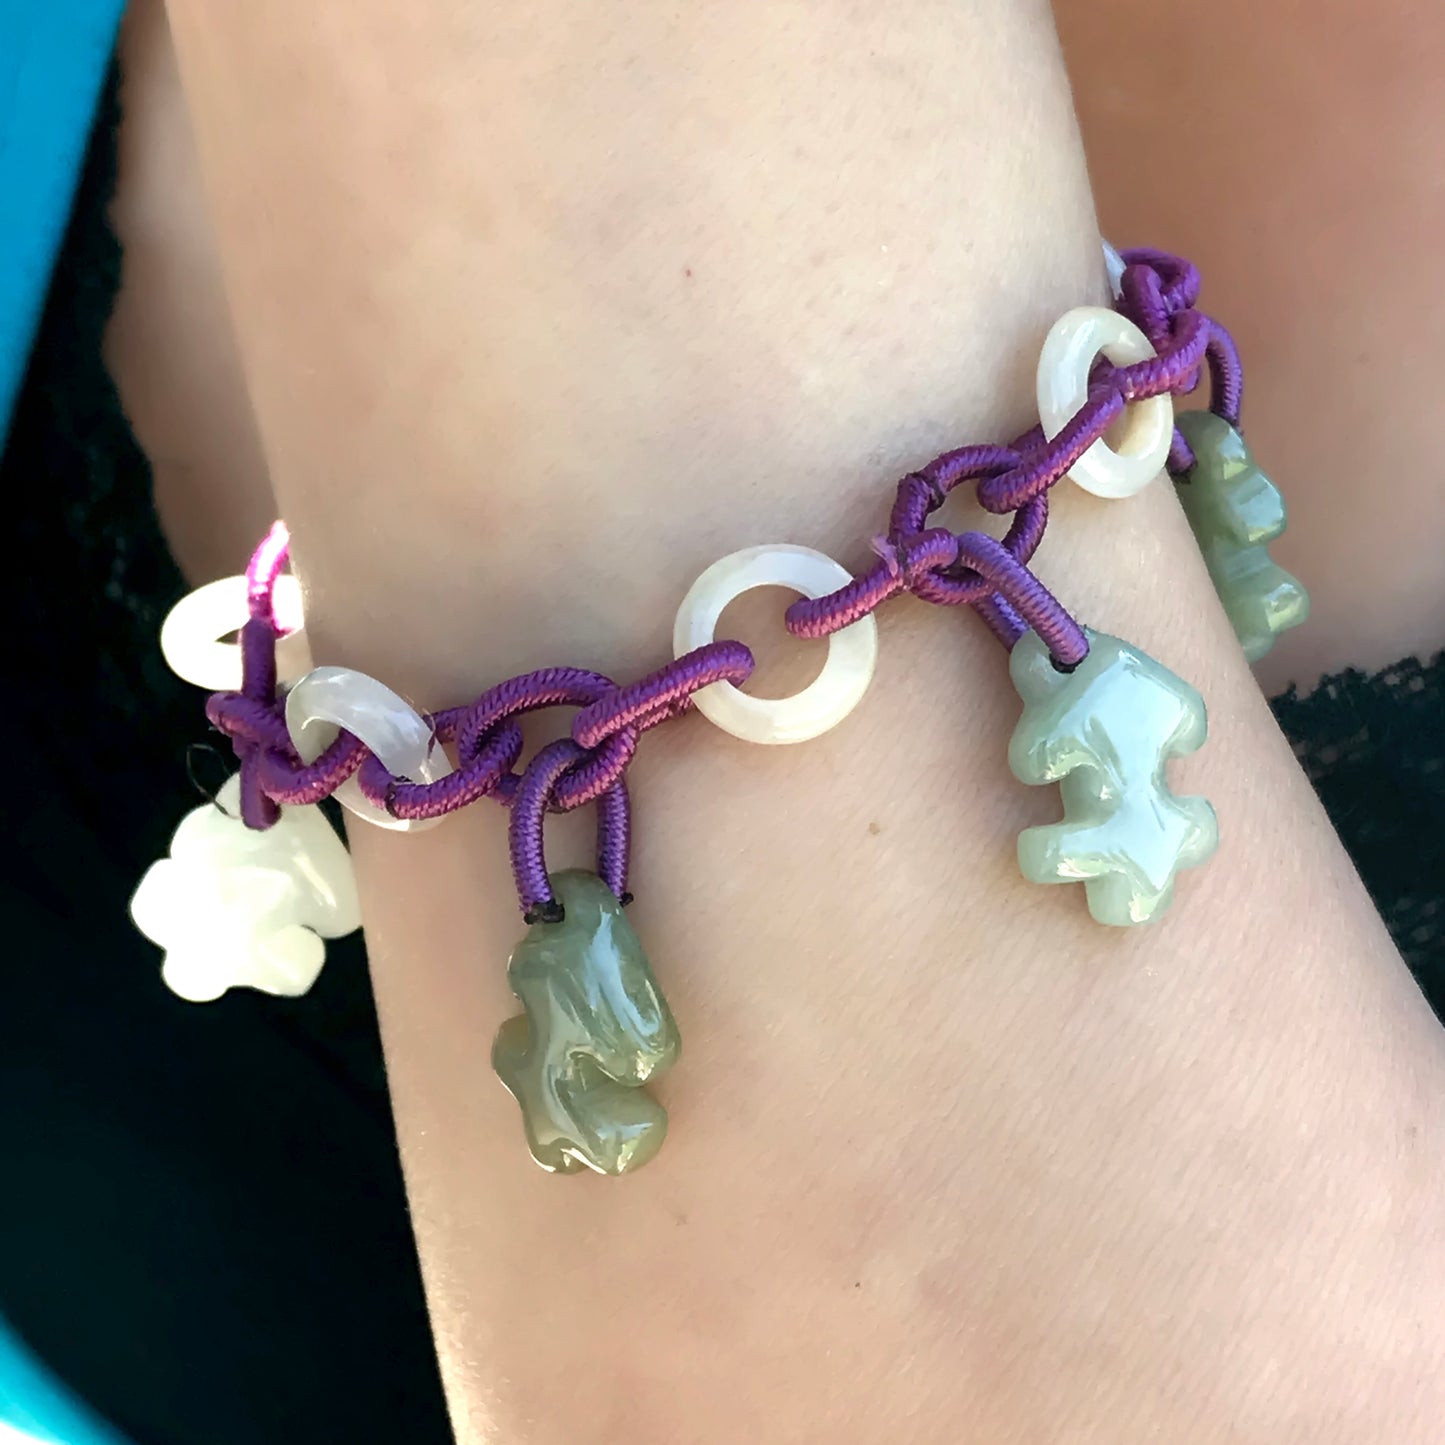 Celebrate your Zodiac Sign with Sagittarius Astrology Jade Bracelet made with Purple Cord